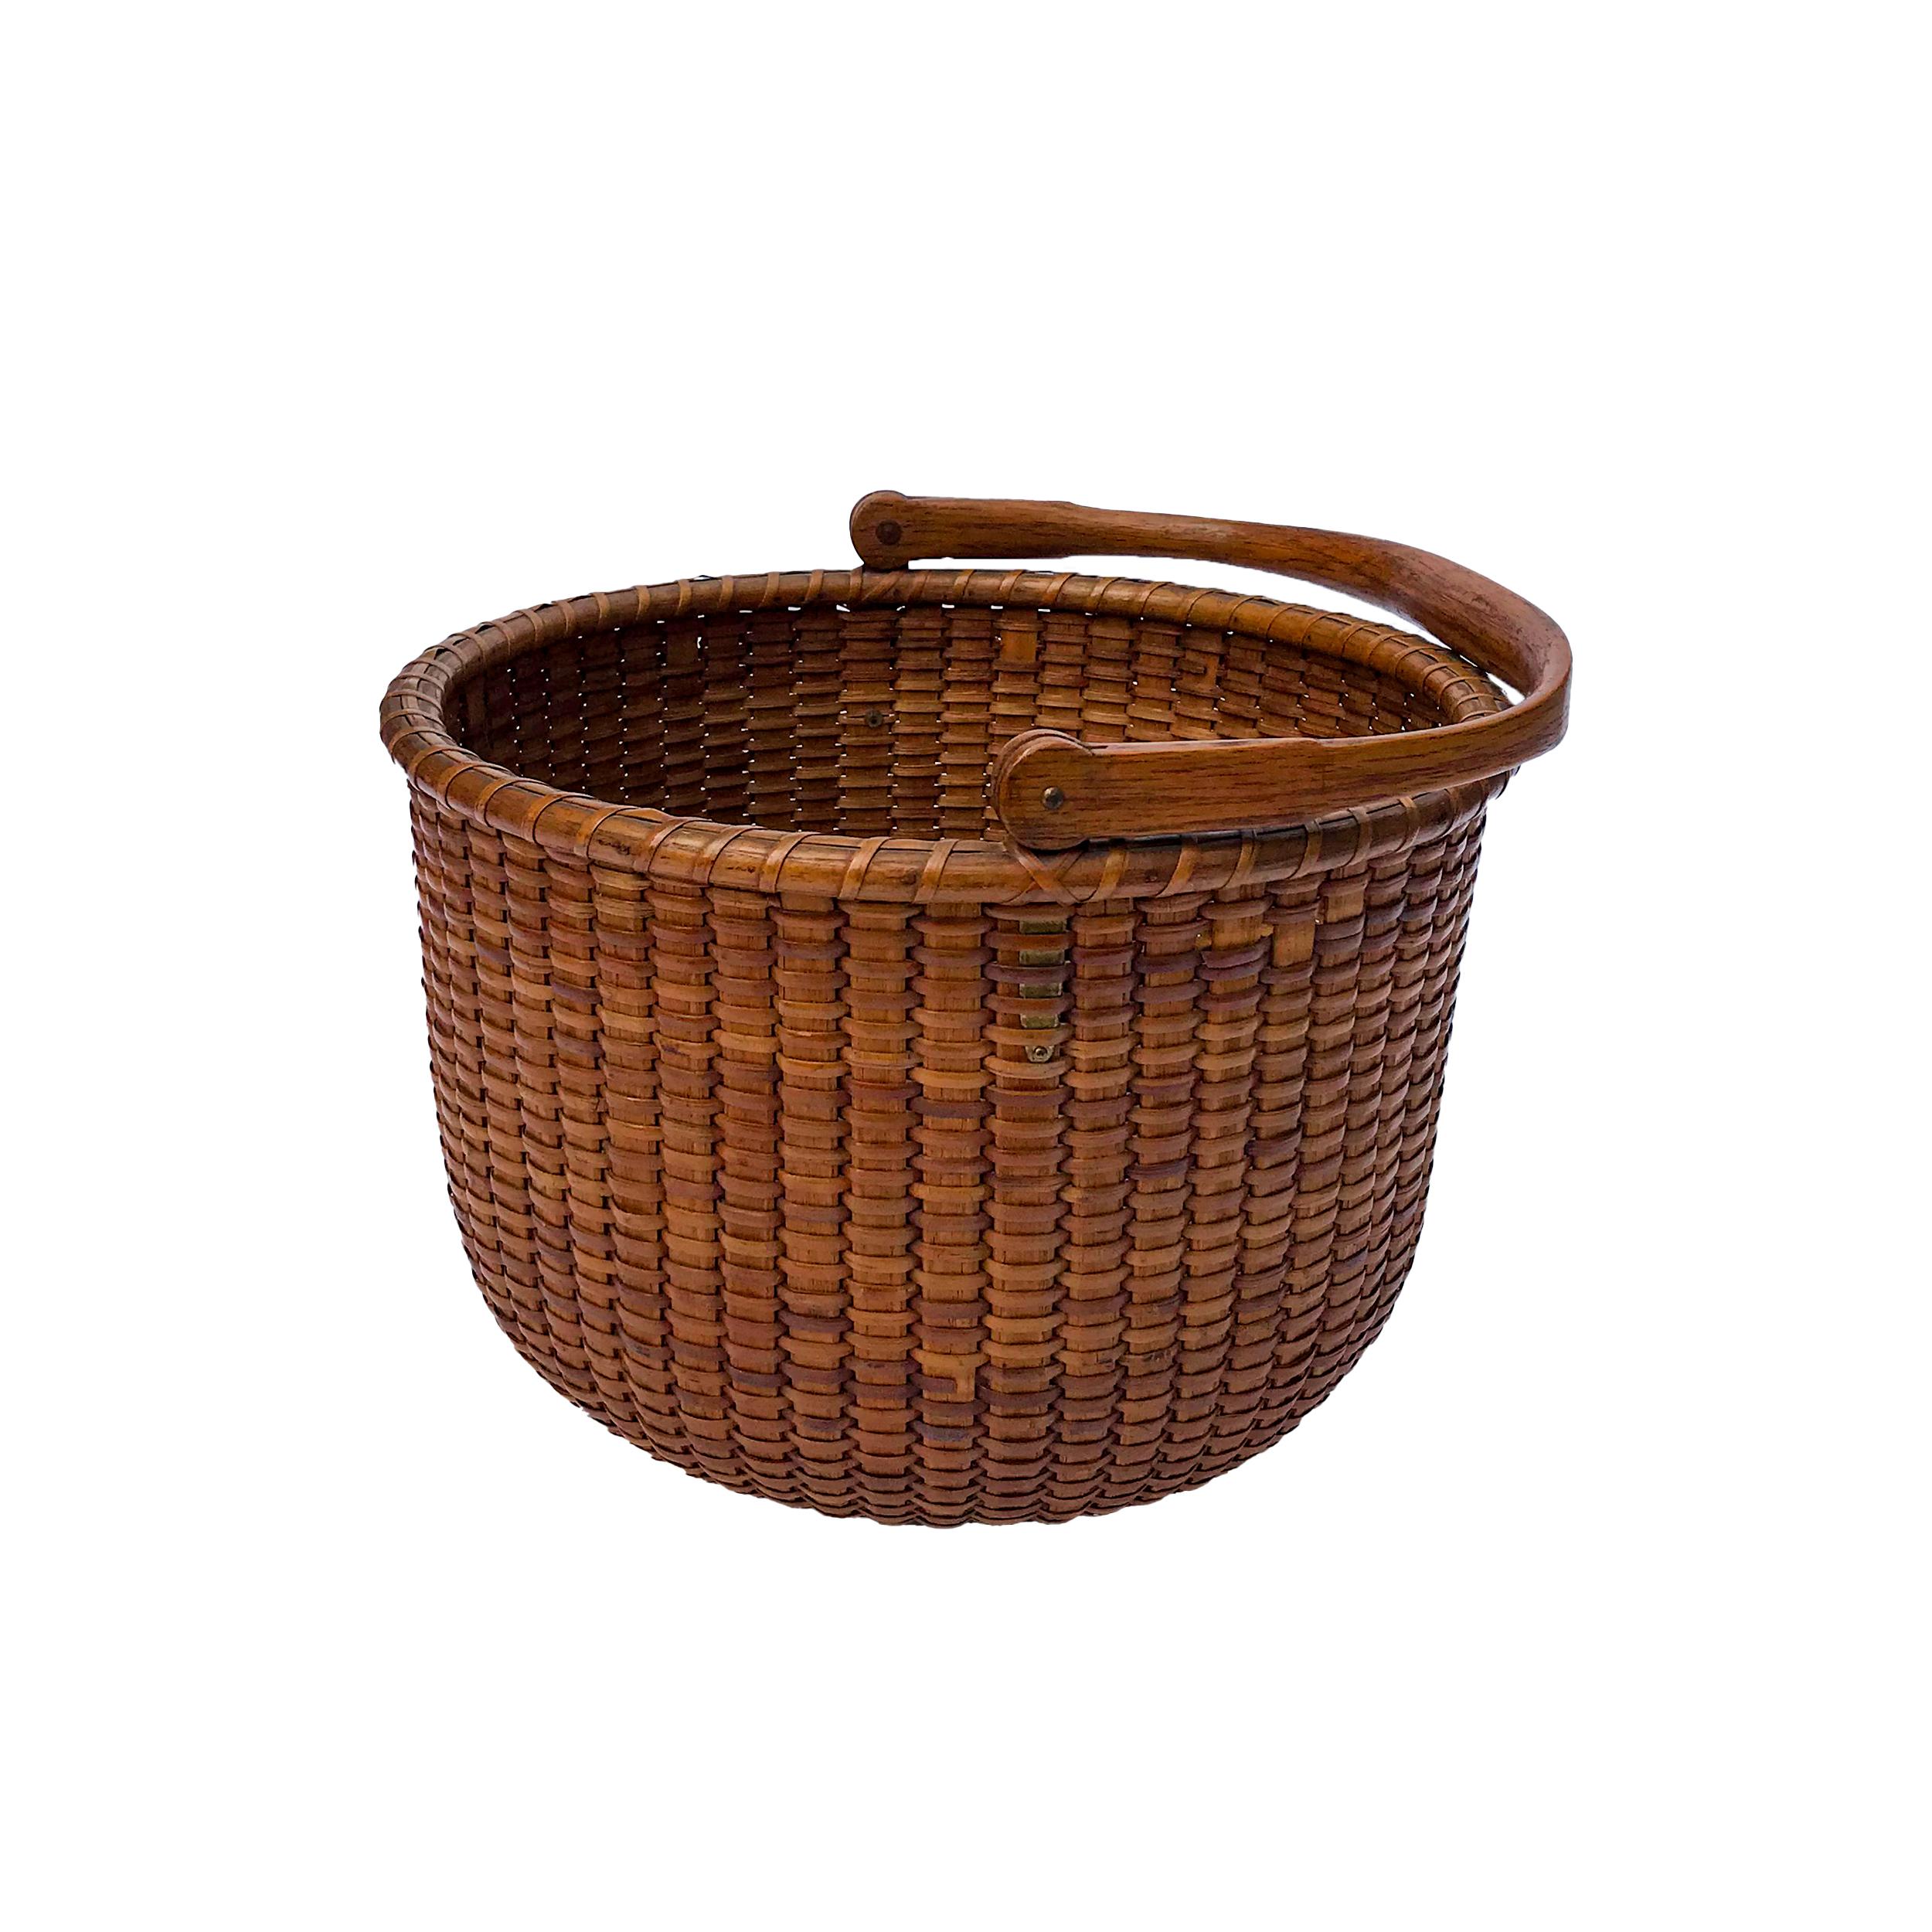 The basket has a rich honey patina throughout, made with oak staves and a swing handle that's notched and rounded at the ends and attached with brass ears. The mahogany bottom has four concentric rings which are typical features of an Andrew